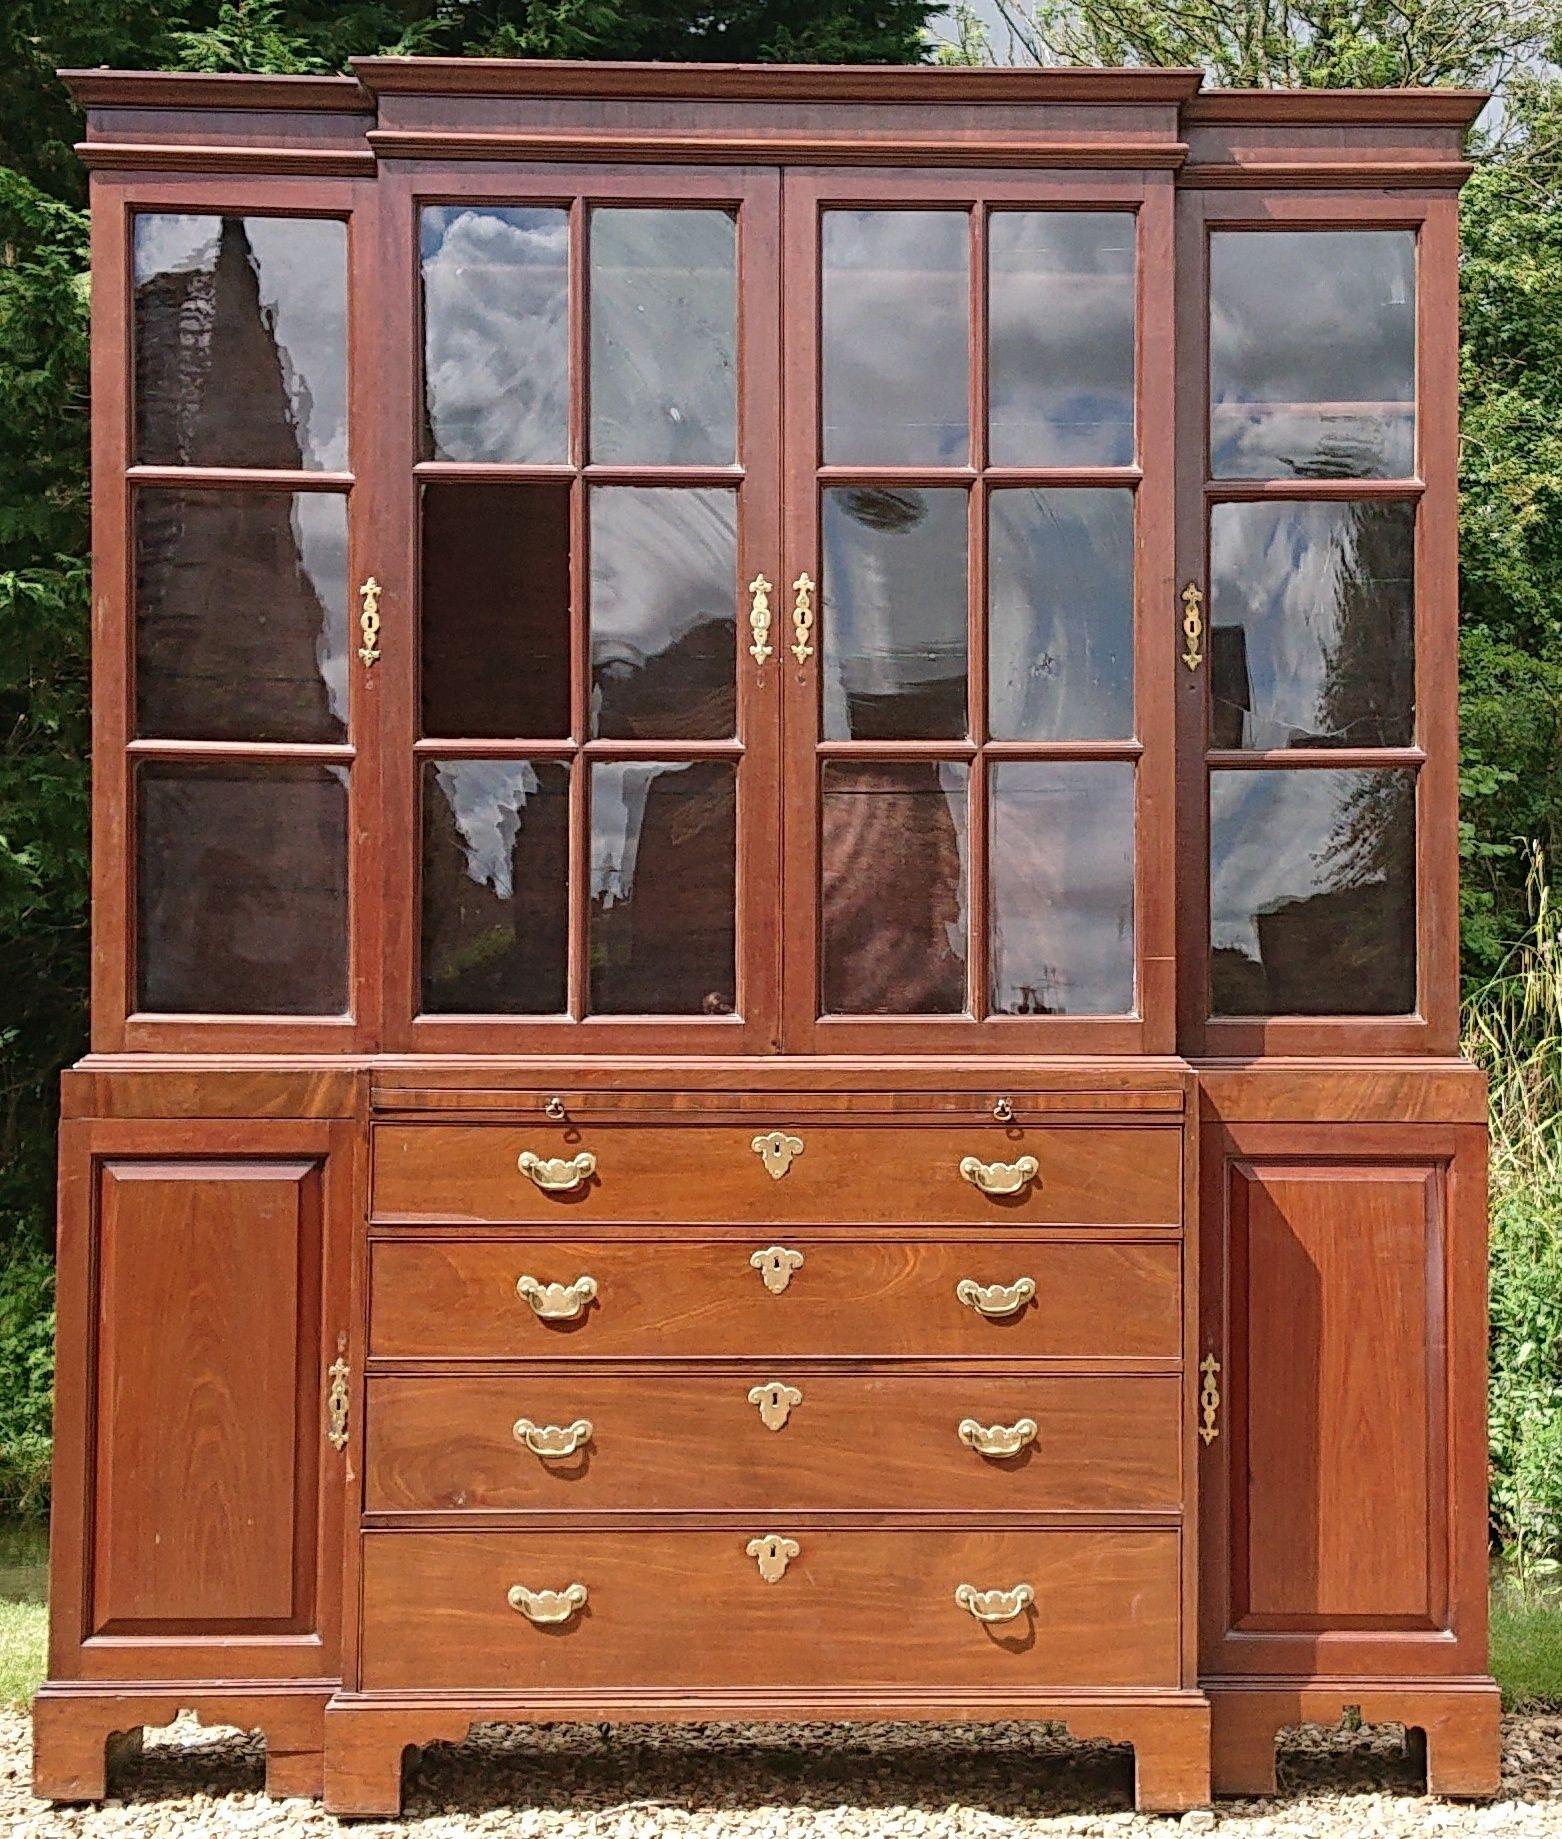 Very fine quality antique breakfront bookcase suitable for a grand house drawing room, this is an especially fine example of the earlier Georgian period and it has the attrubites of the period such as fine dense timber, large hand cut dove tails,